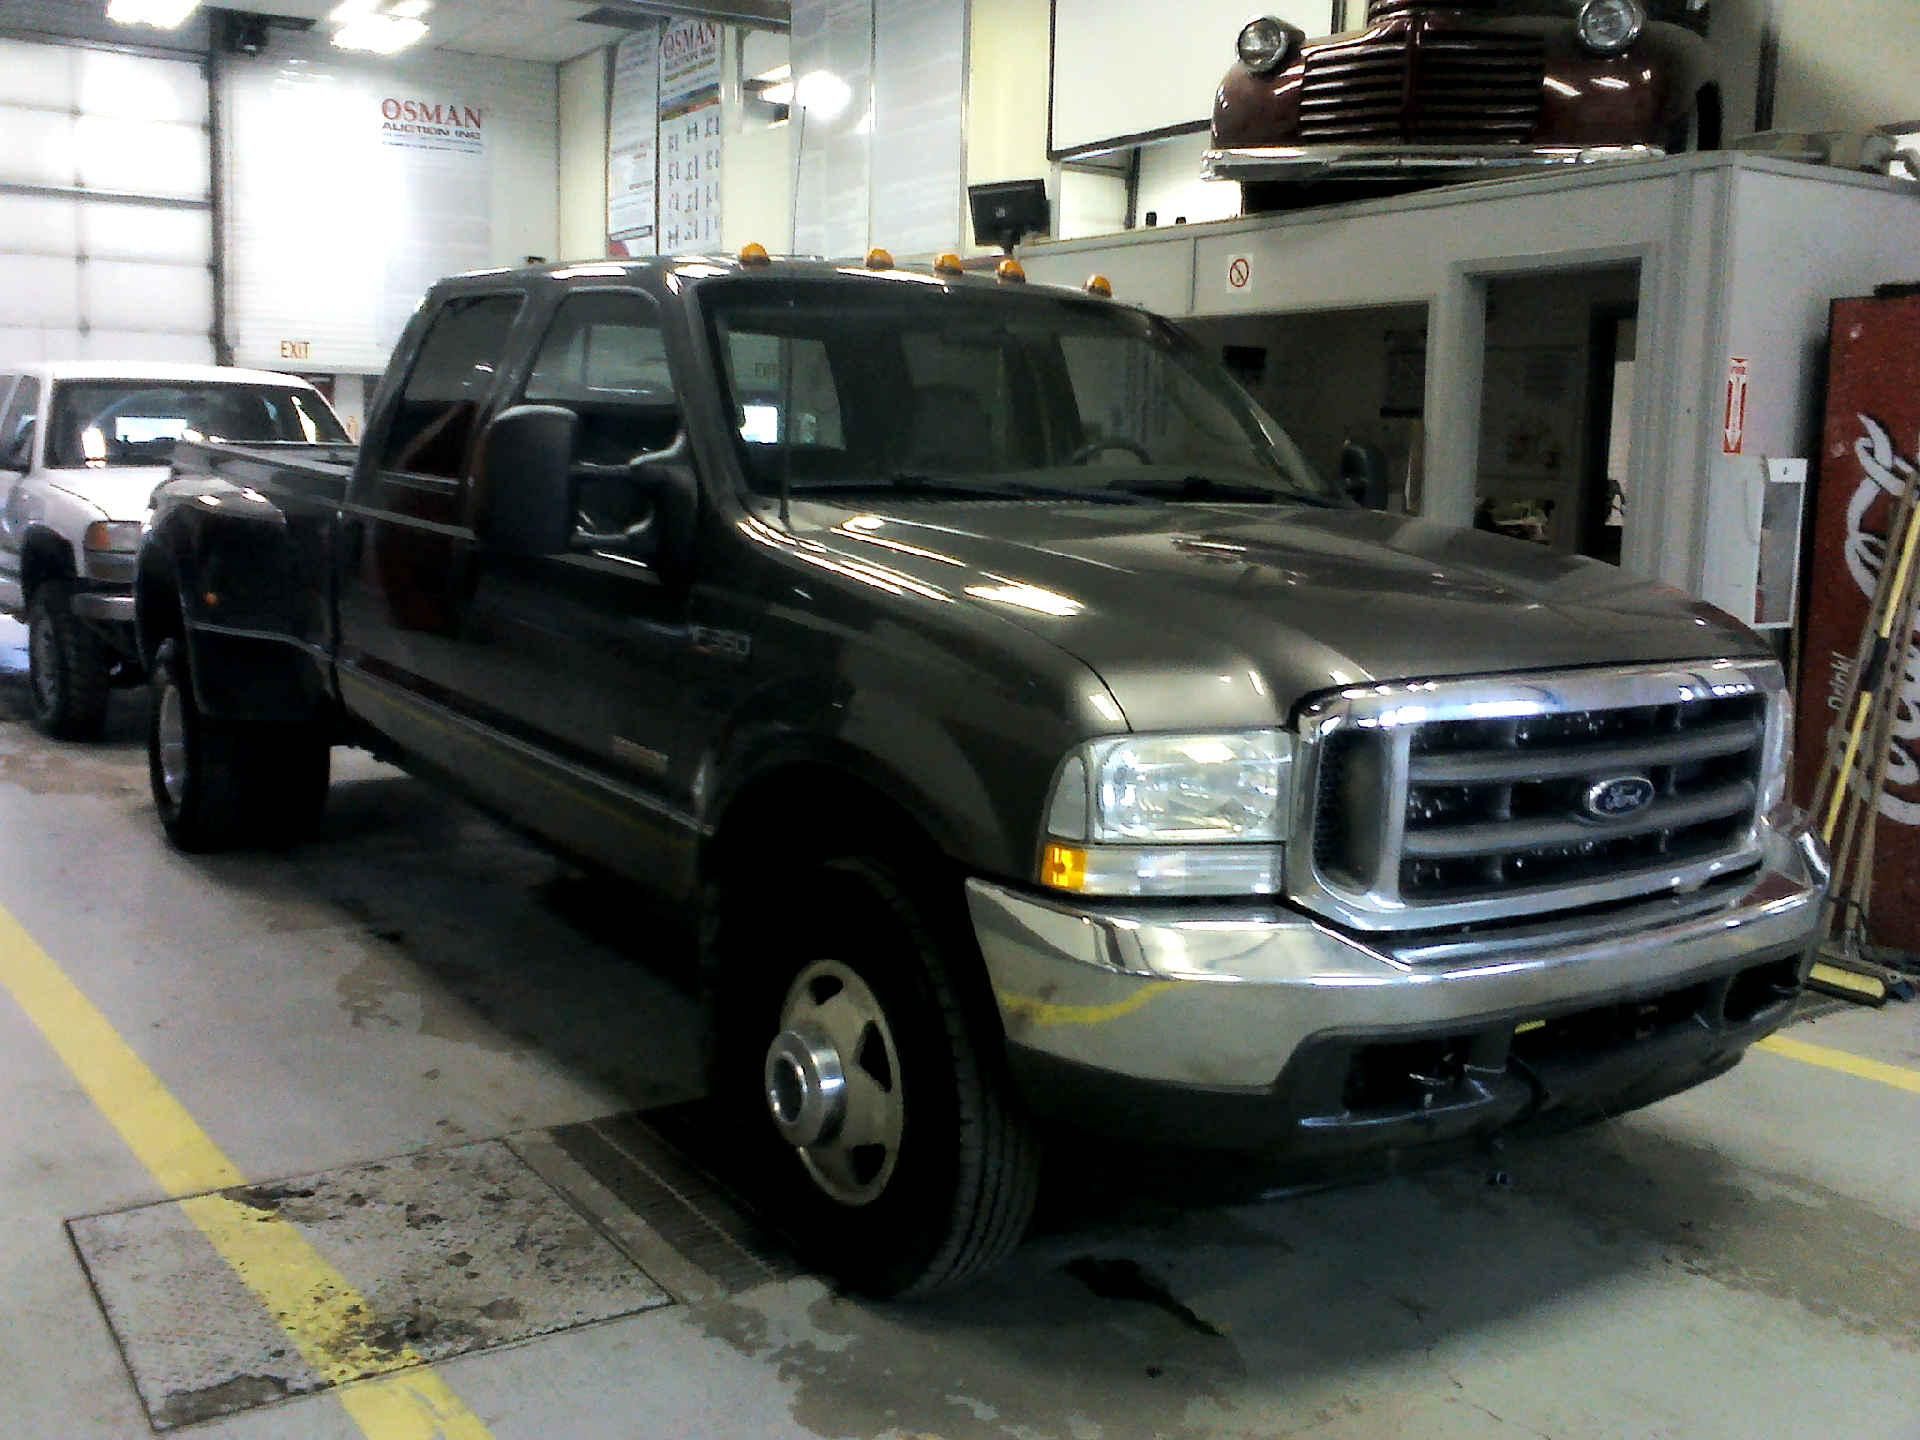 2003 FORD F-350 SD LARIAT CREW CAB 4WD DRW 6.0L V8 OHV 32V TURBO DIESEL AUTOMATIC SN: - Image 3 of 9